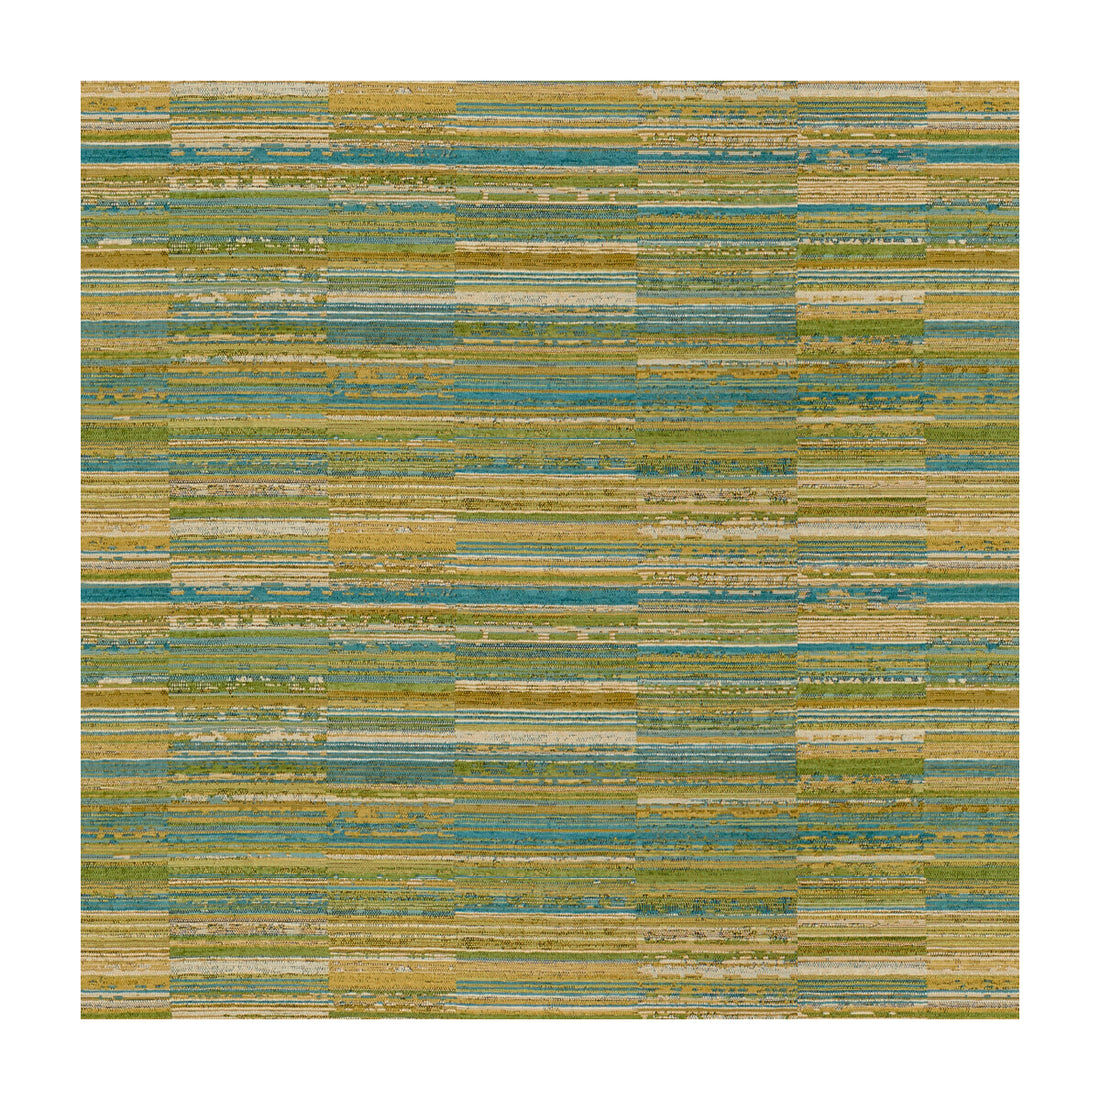 Rafiki fabric in african sky color - pattern 33867.523.0 - by Kravet Contract in the Tanzania J Banks collection